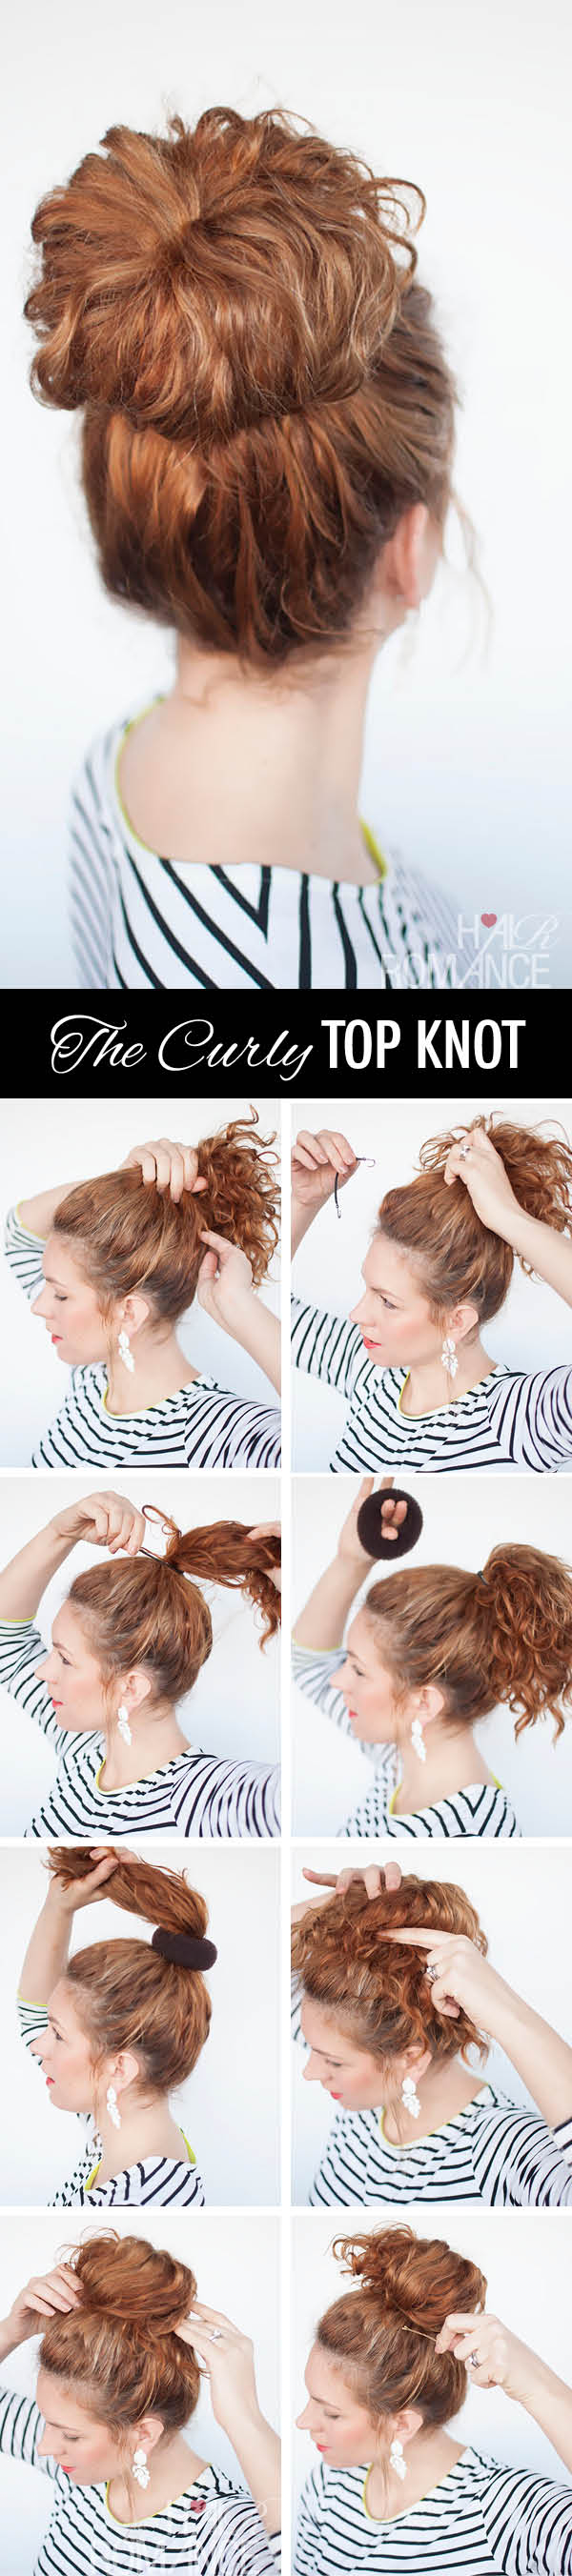 Hair-Romance-the-curly-top-knot-hairstyle-tutorial